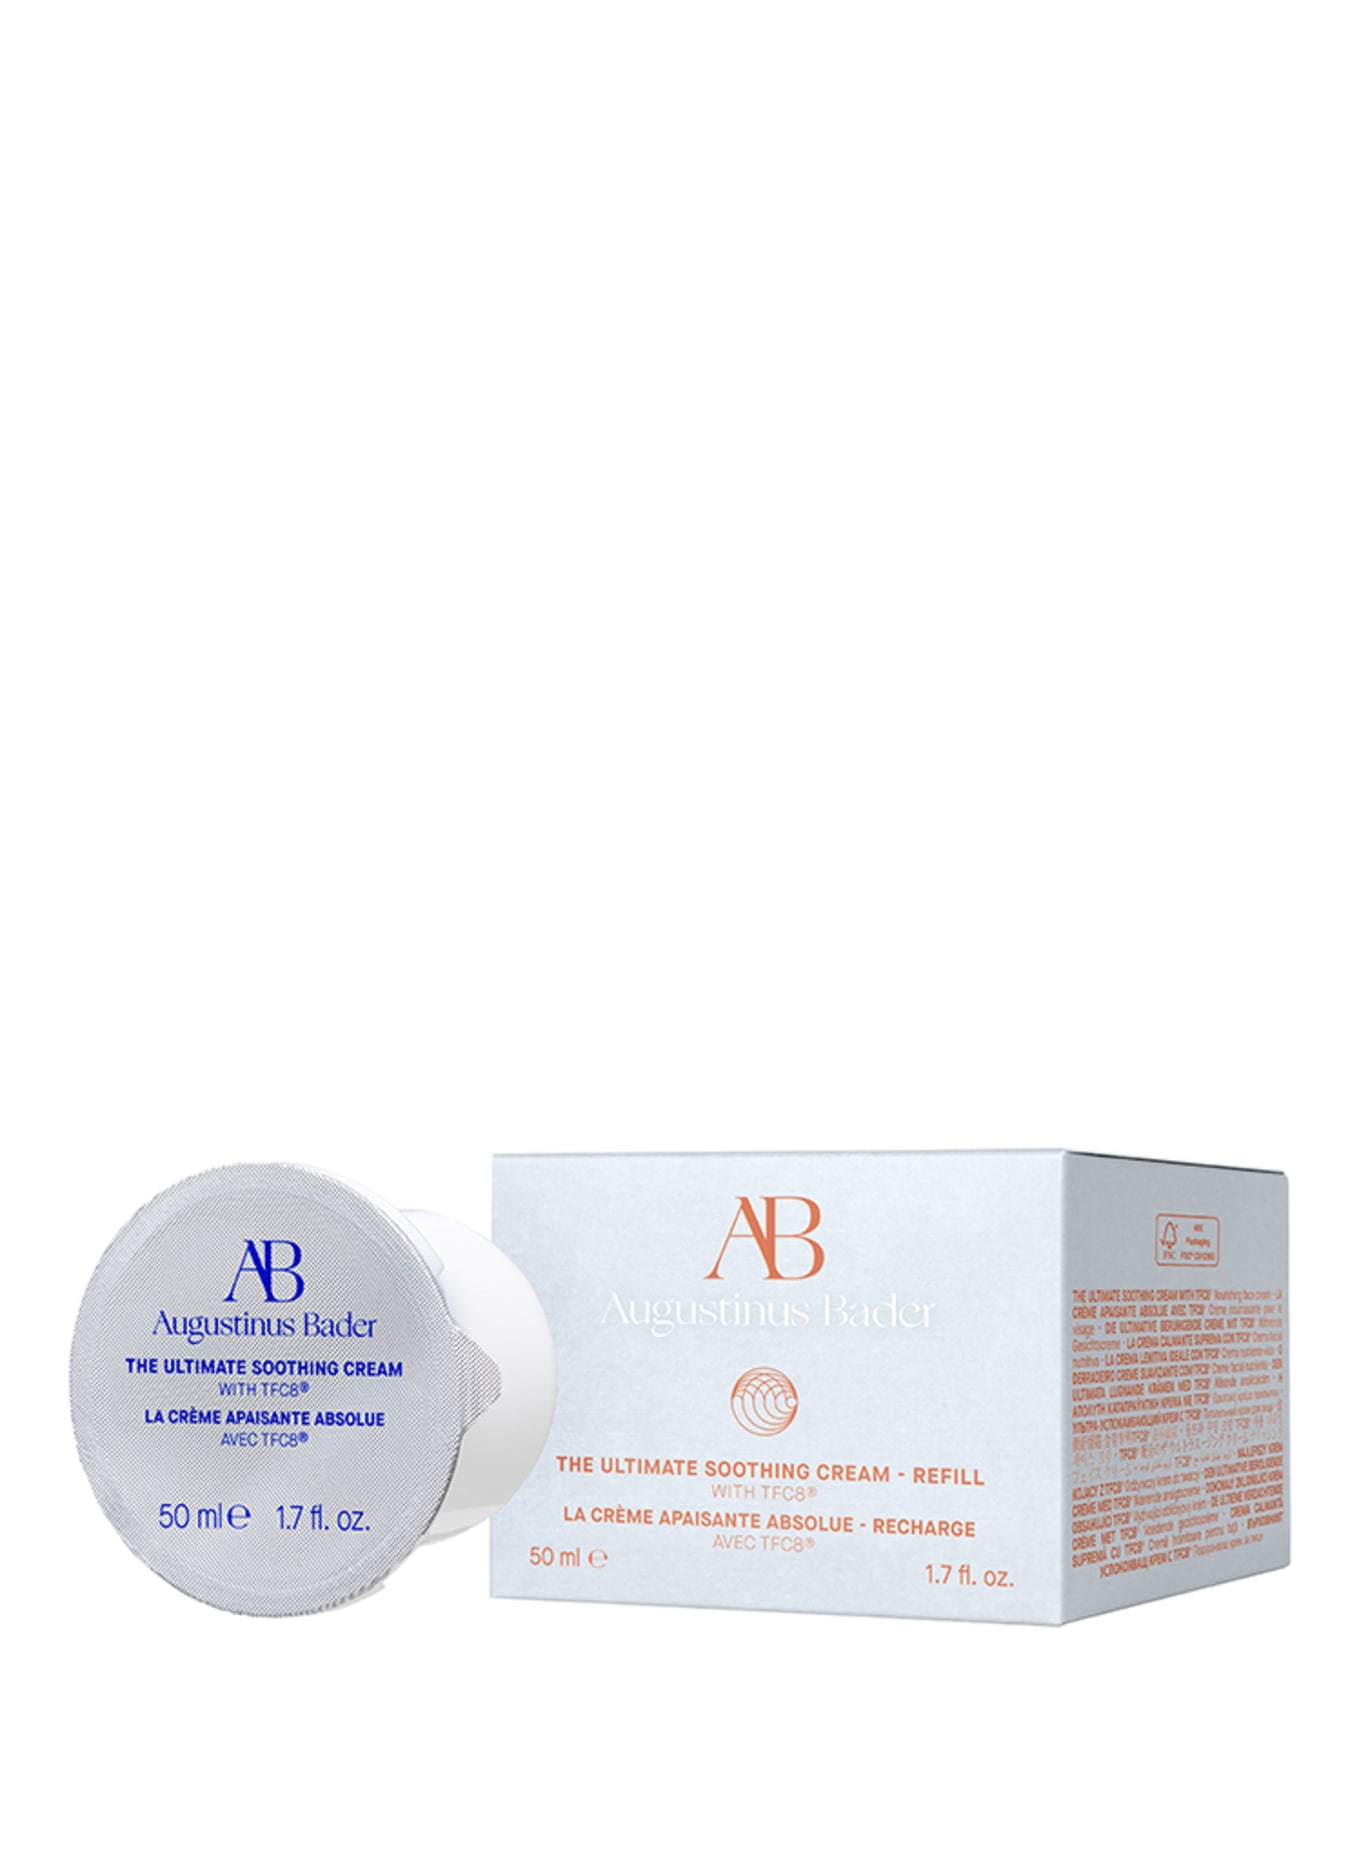 Augustinus Bader THE ULTIMATE SOOTHING CREAM REFILL (Obrazek 2)